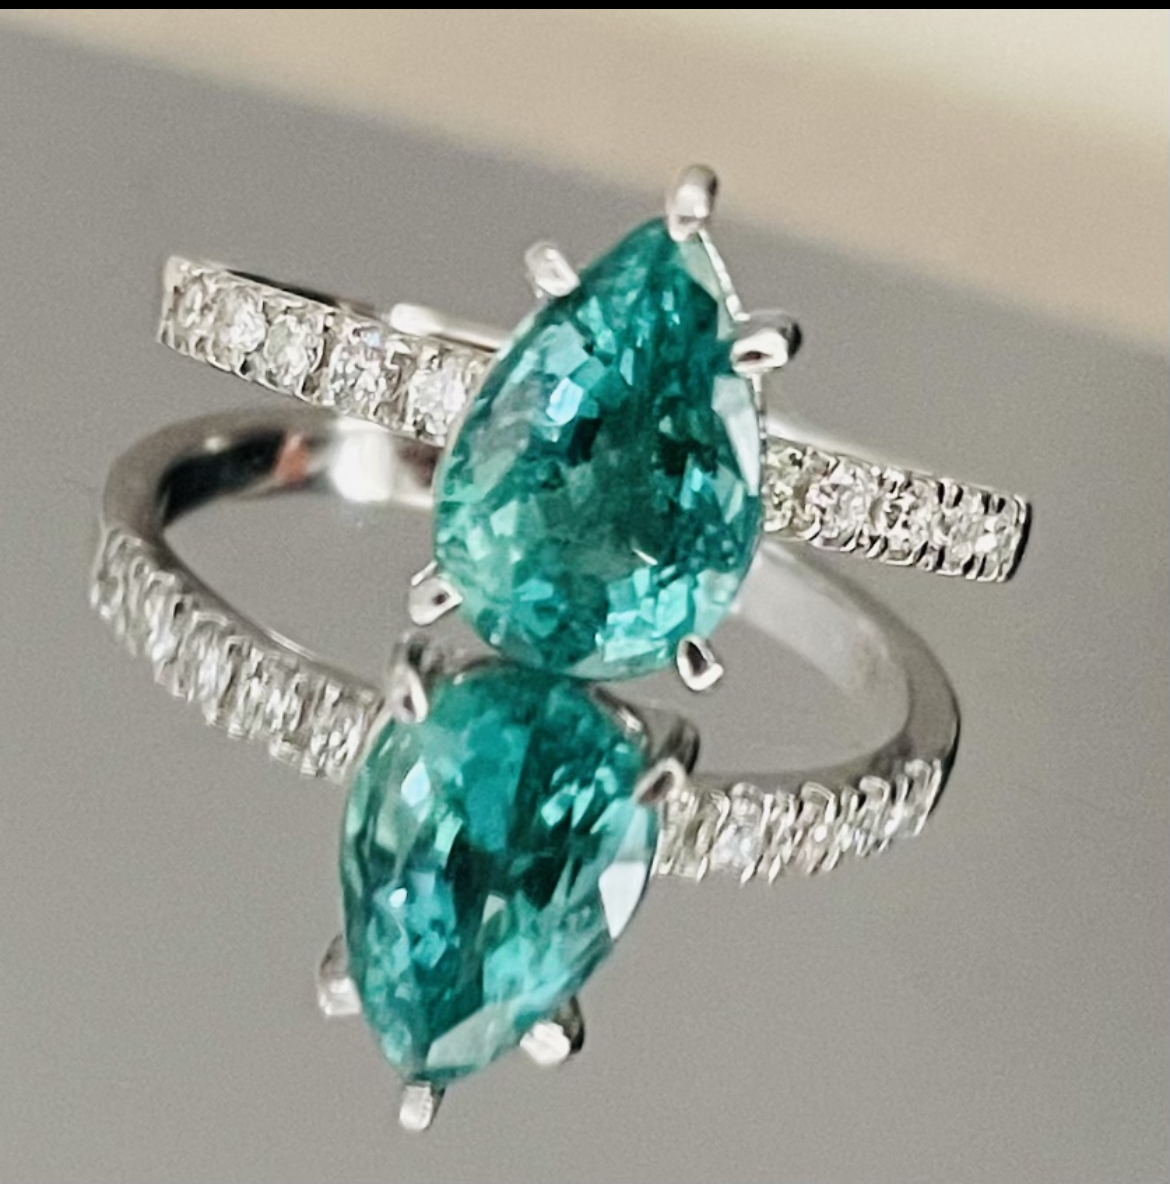 Beautiful Natural Emerald With Natural Diamonds & 18kGold - Image 2 of 6